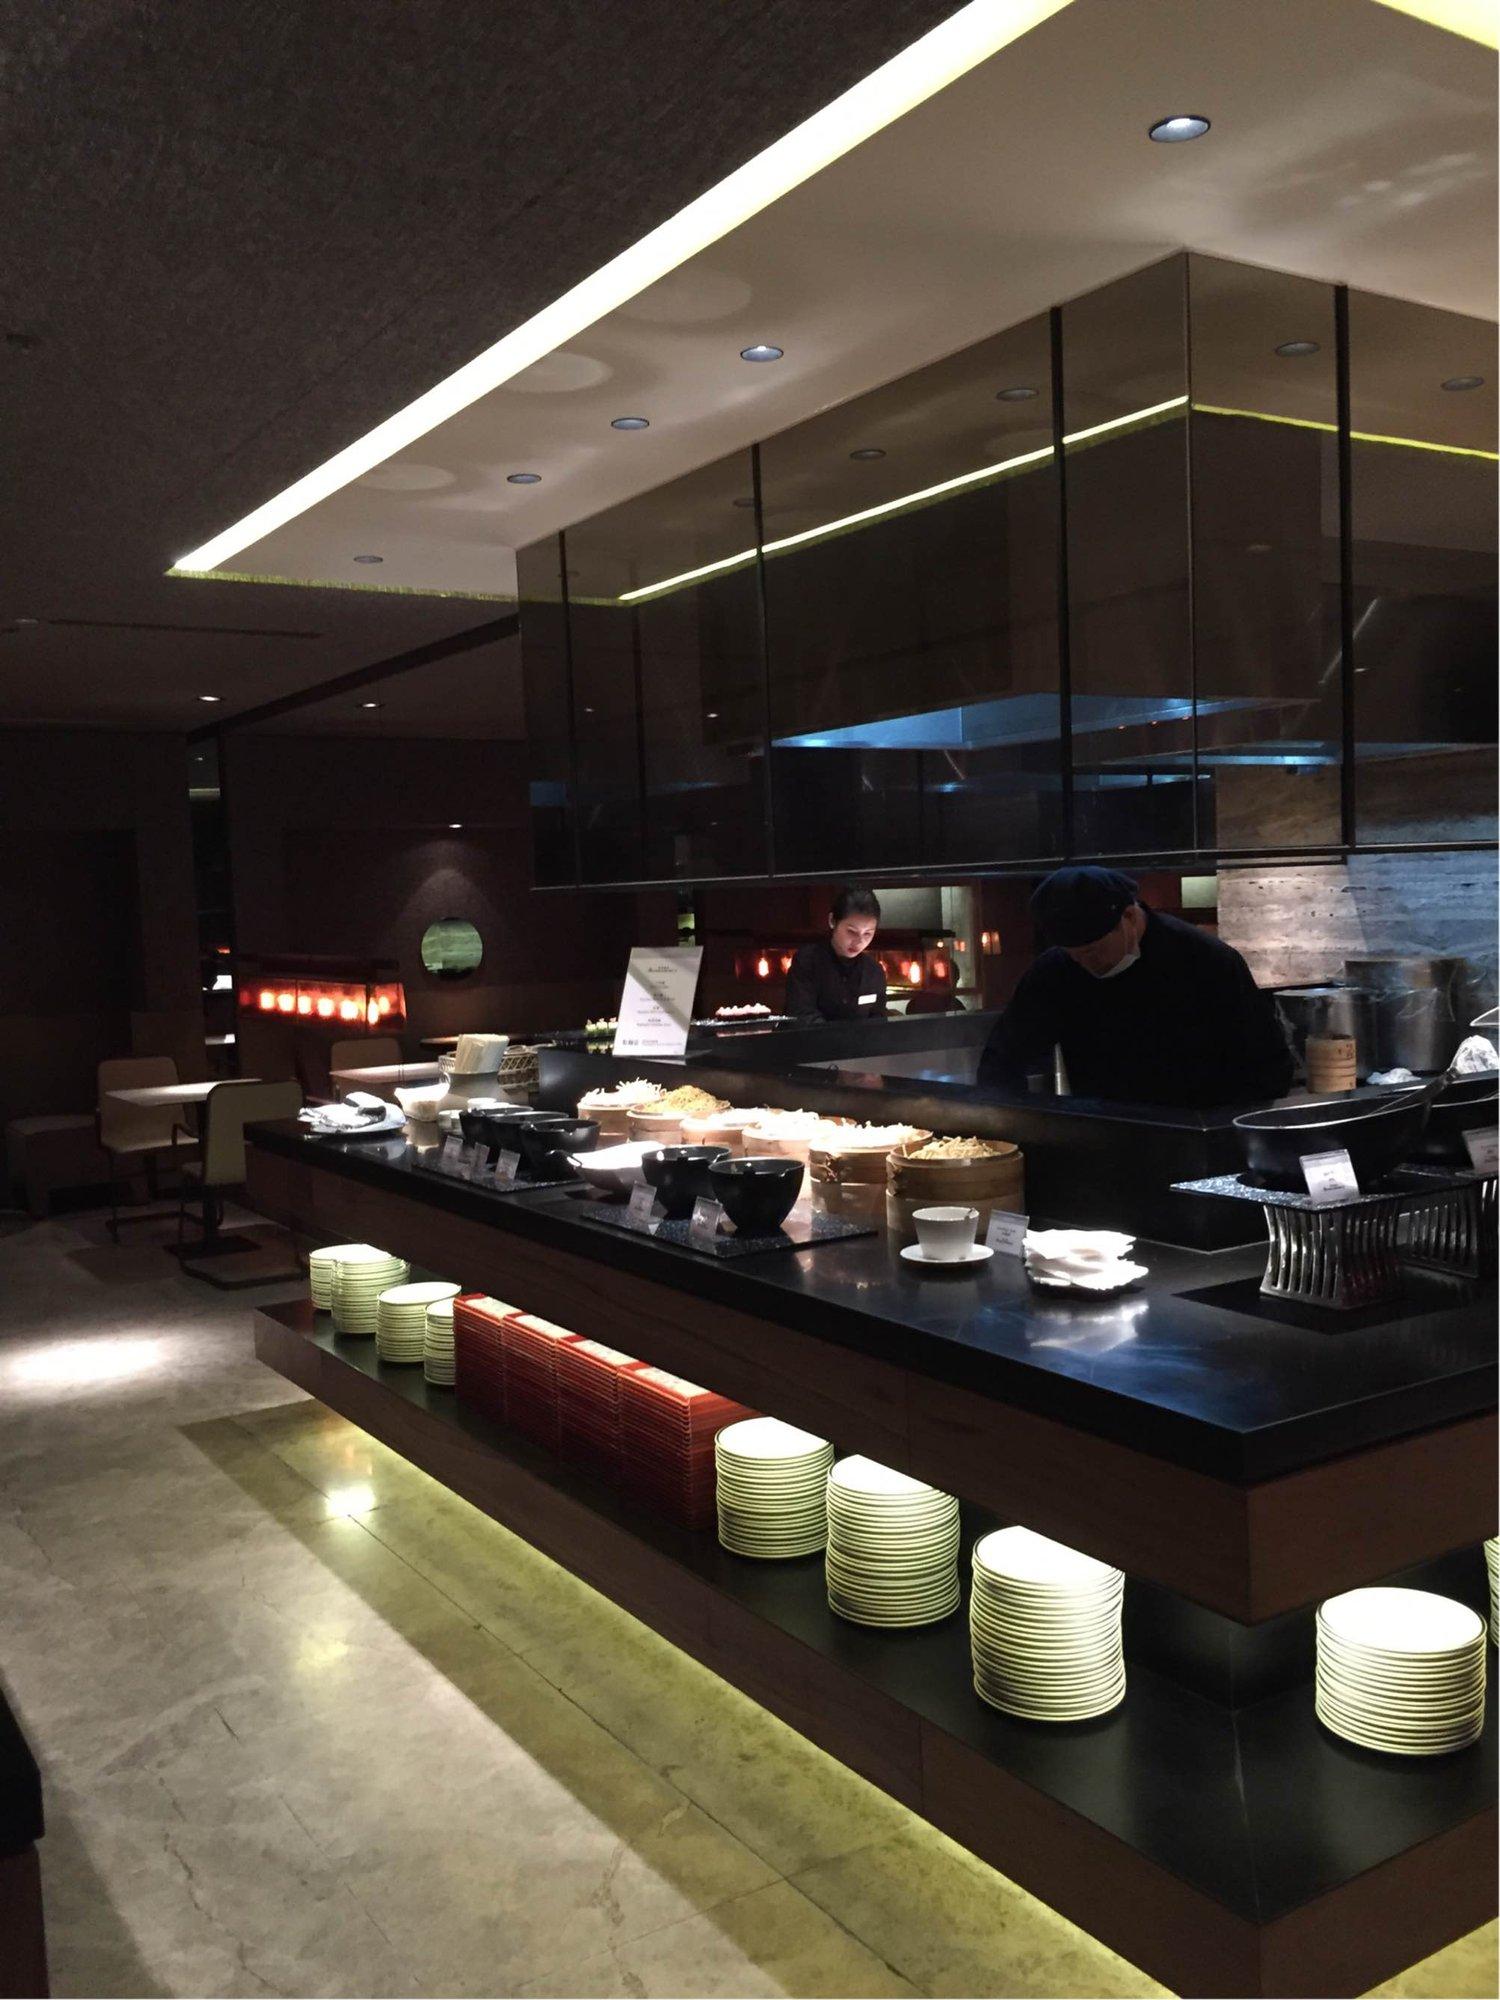 China Airlines Lounge (V1) image 38 of 44